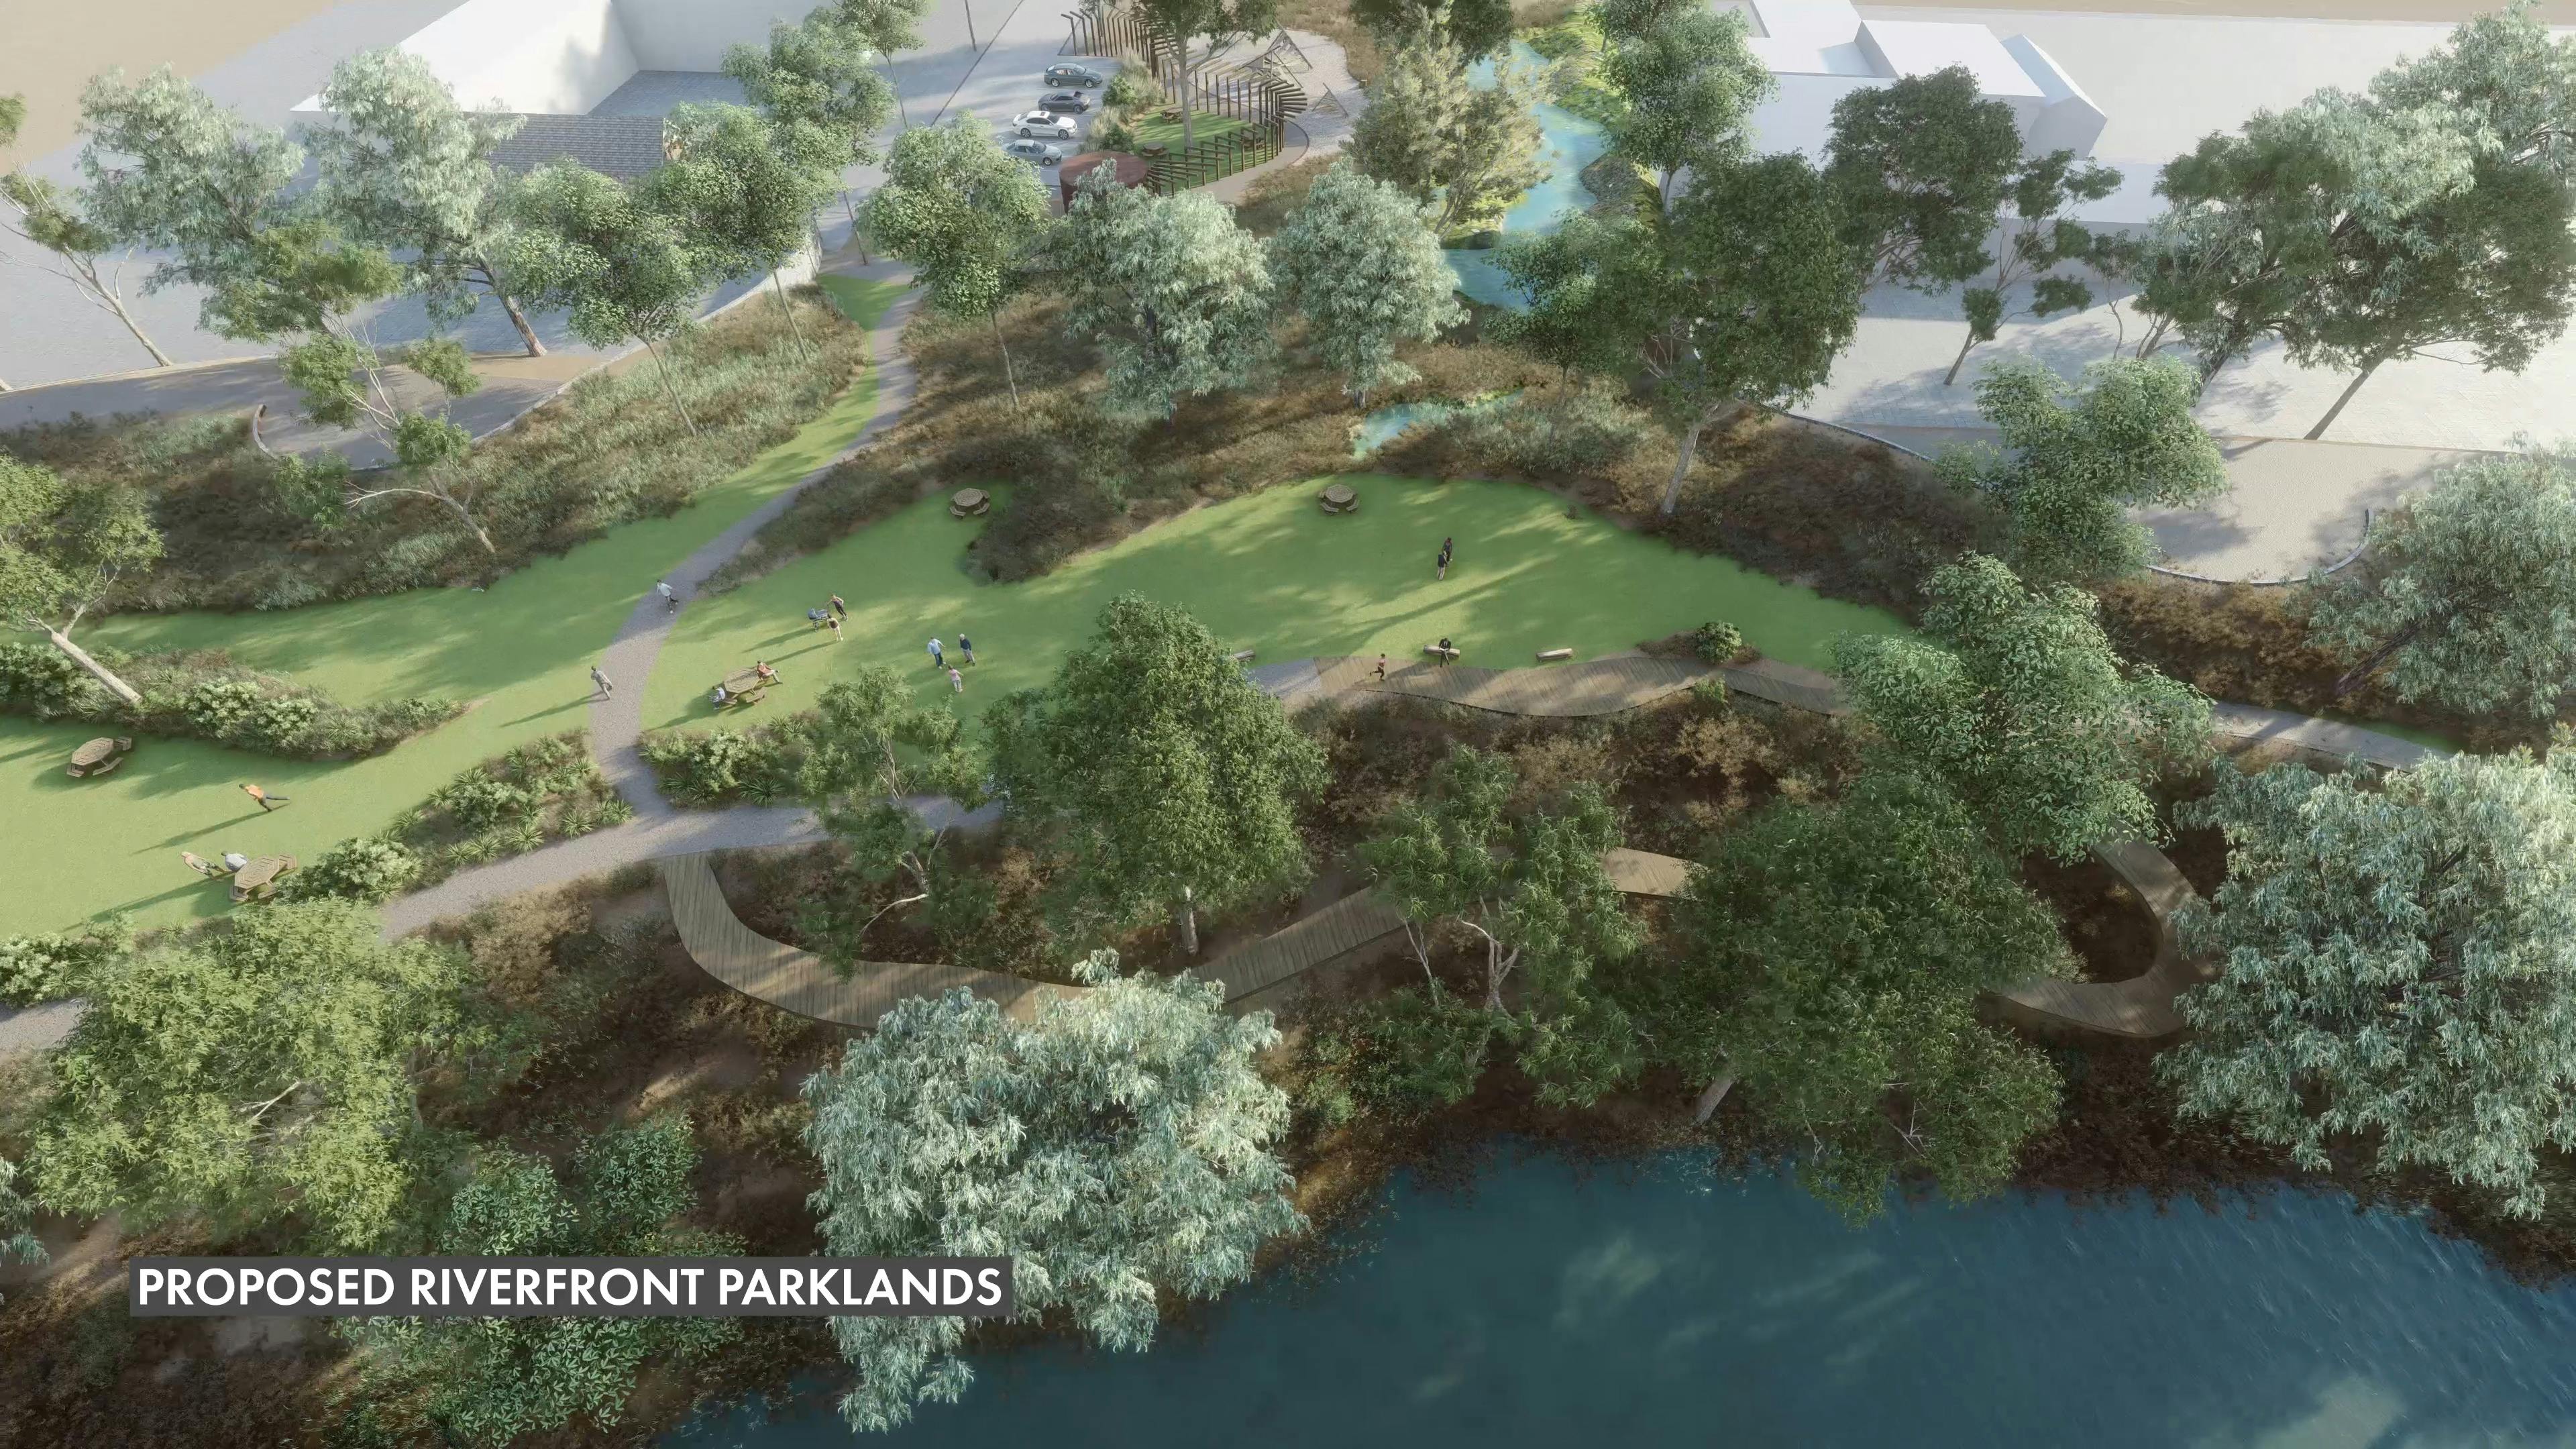 Proposed parkland along the river